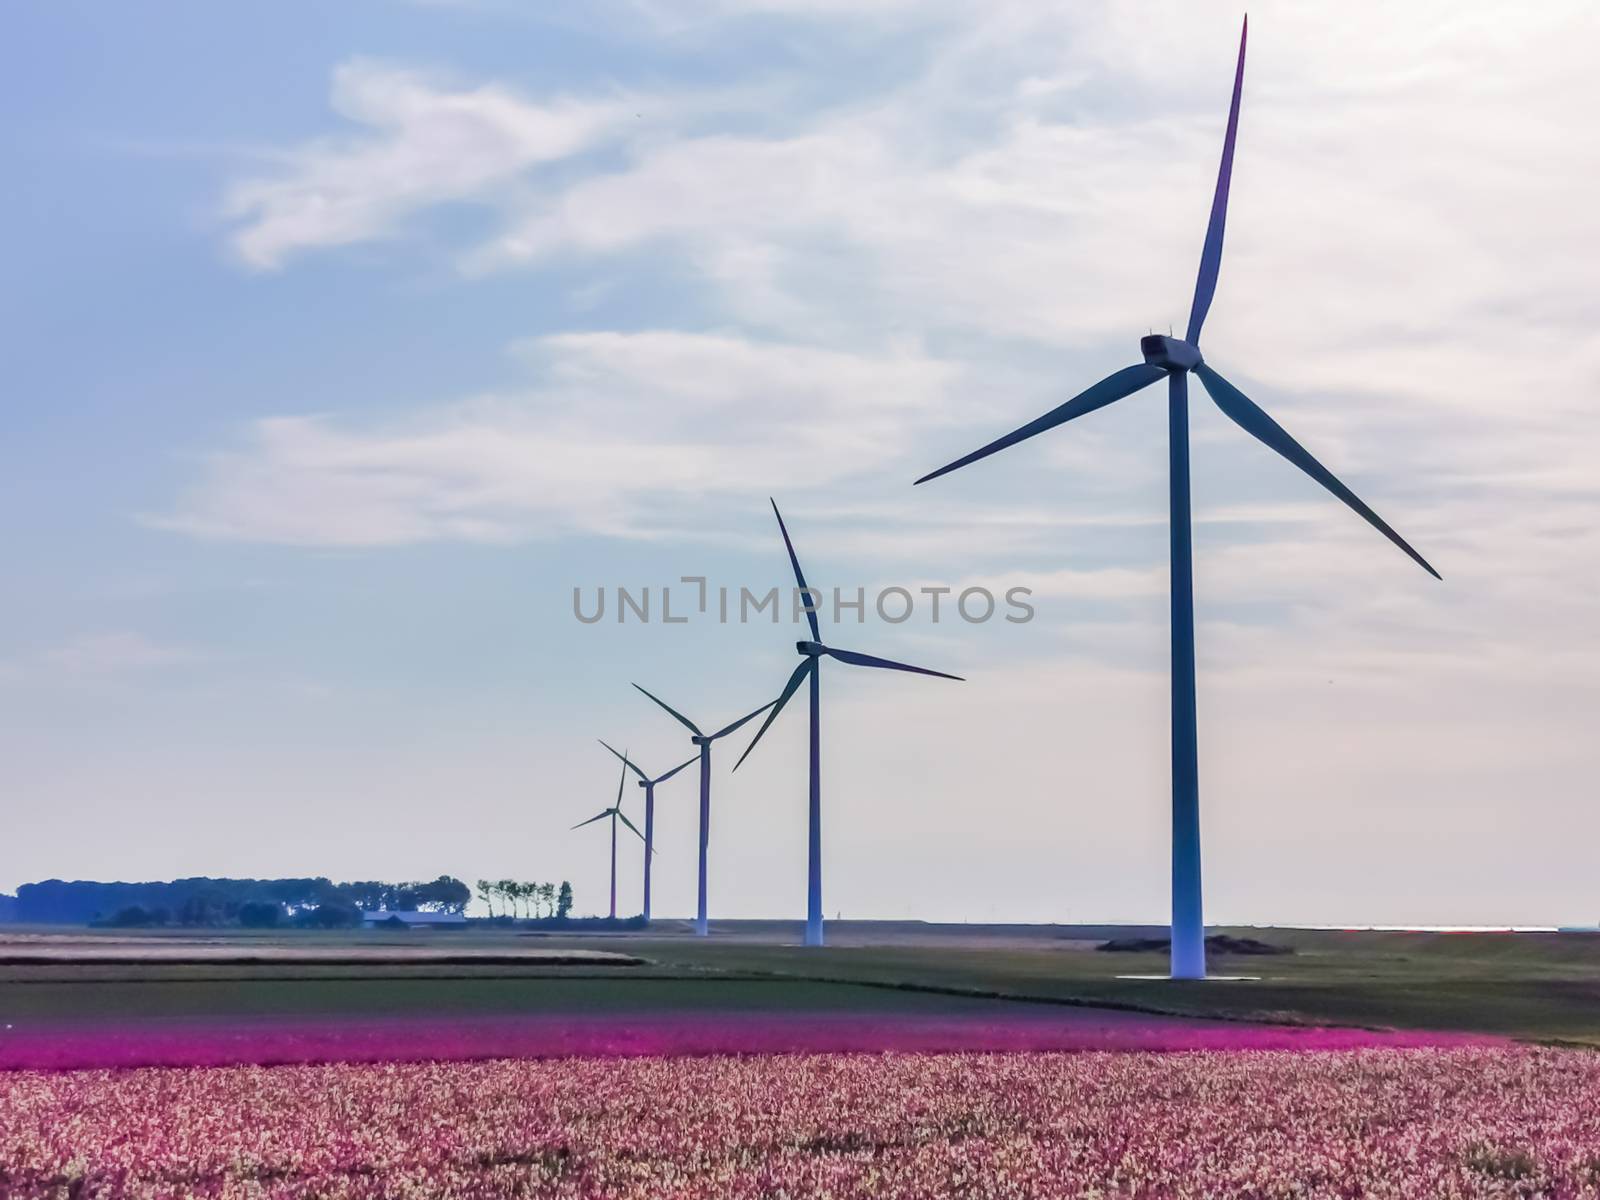 colorful landscape scenery with flowers and windmills in Sint Annaland, touristic town in zeeland, The Netherlands